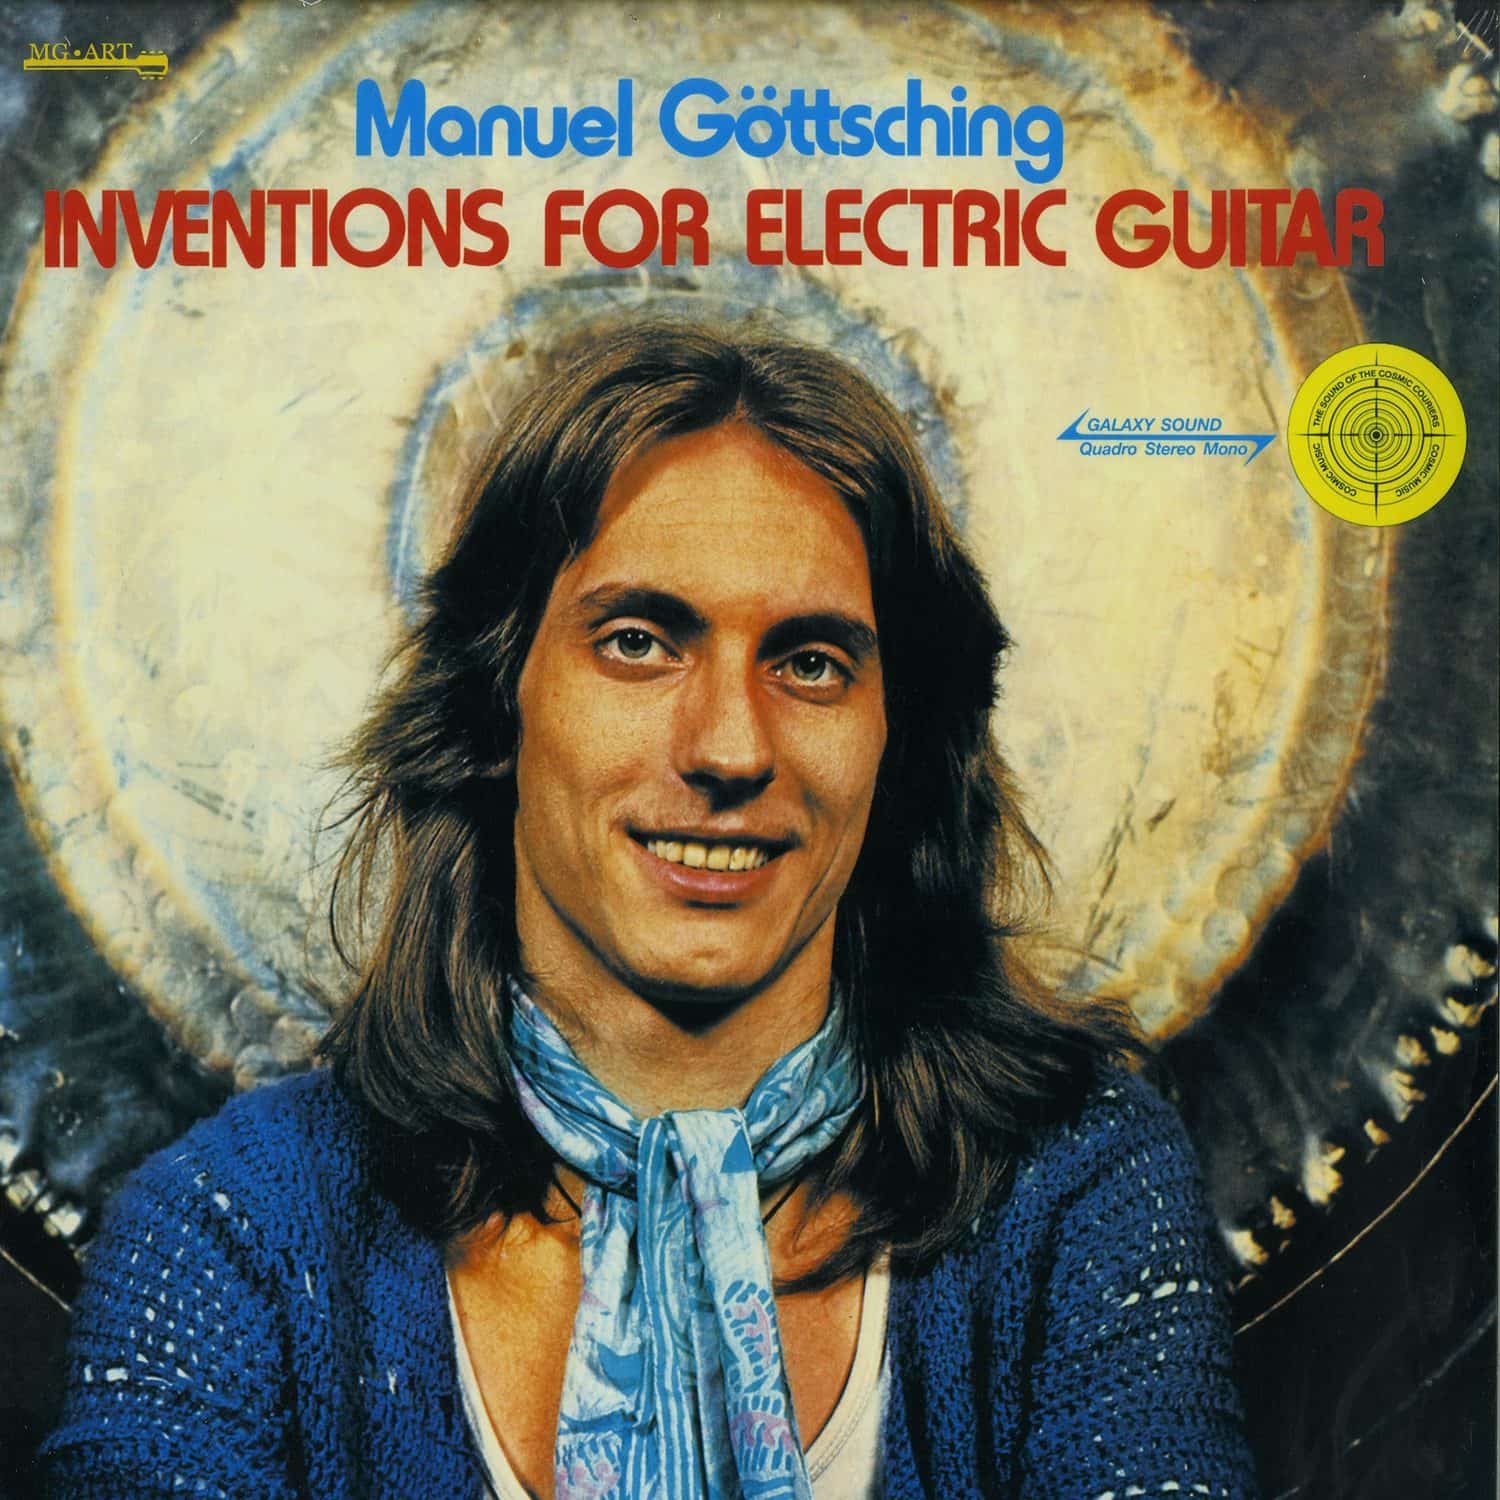 Manuel Goettsching - INVENTIONS FOR ELECTRIC GUITAR 